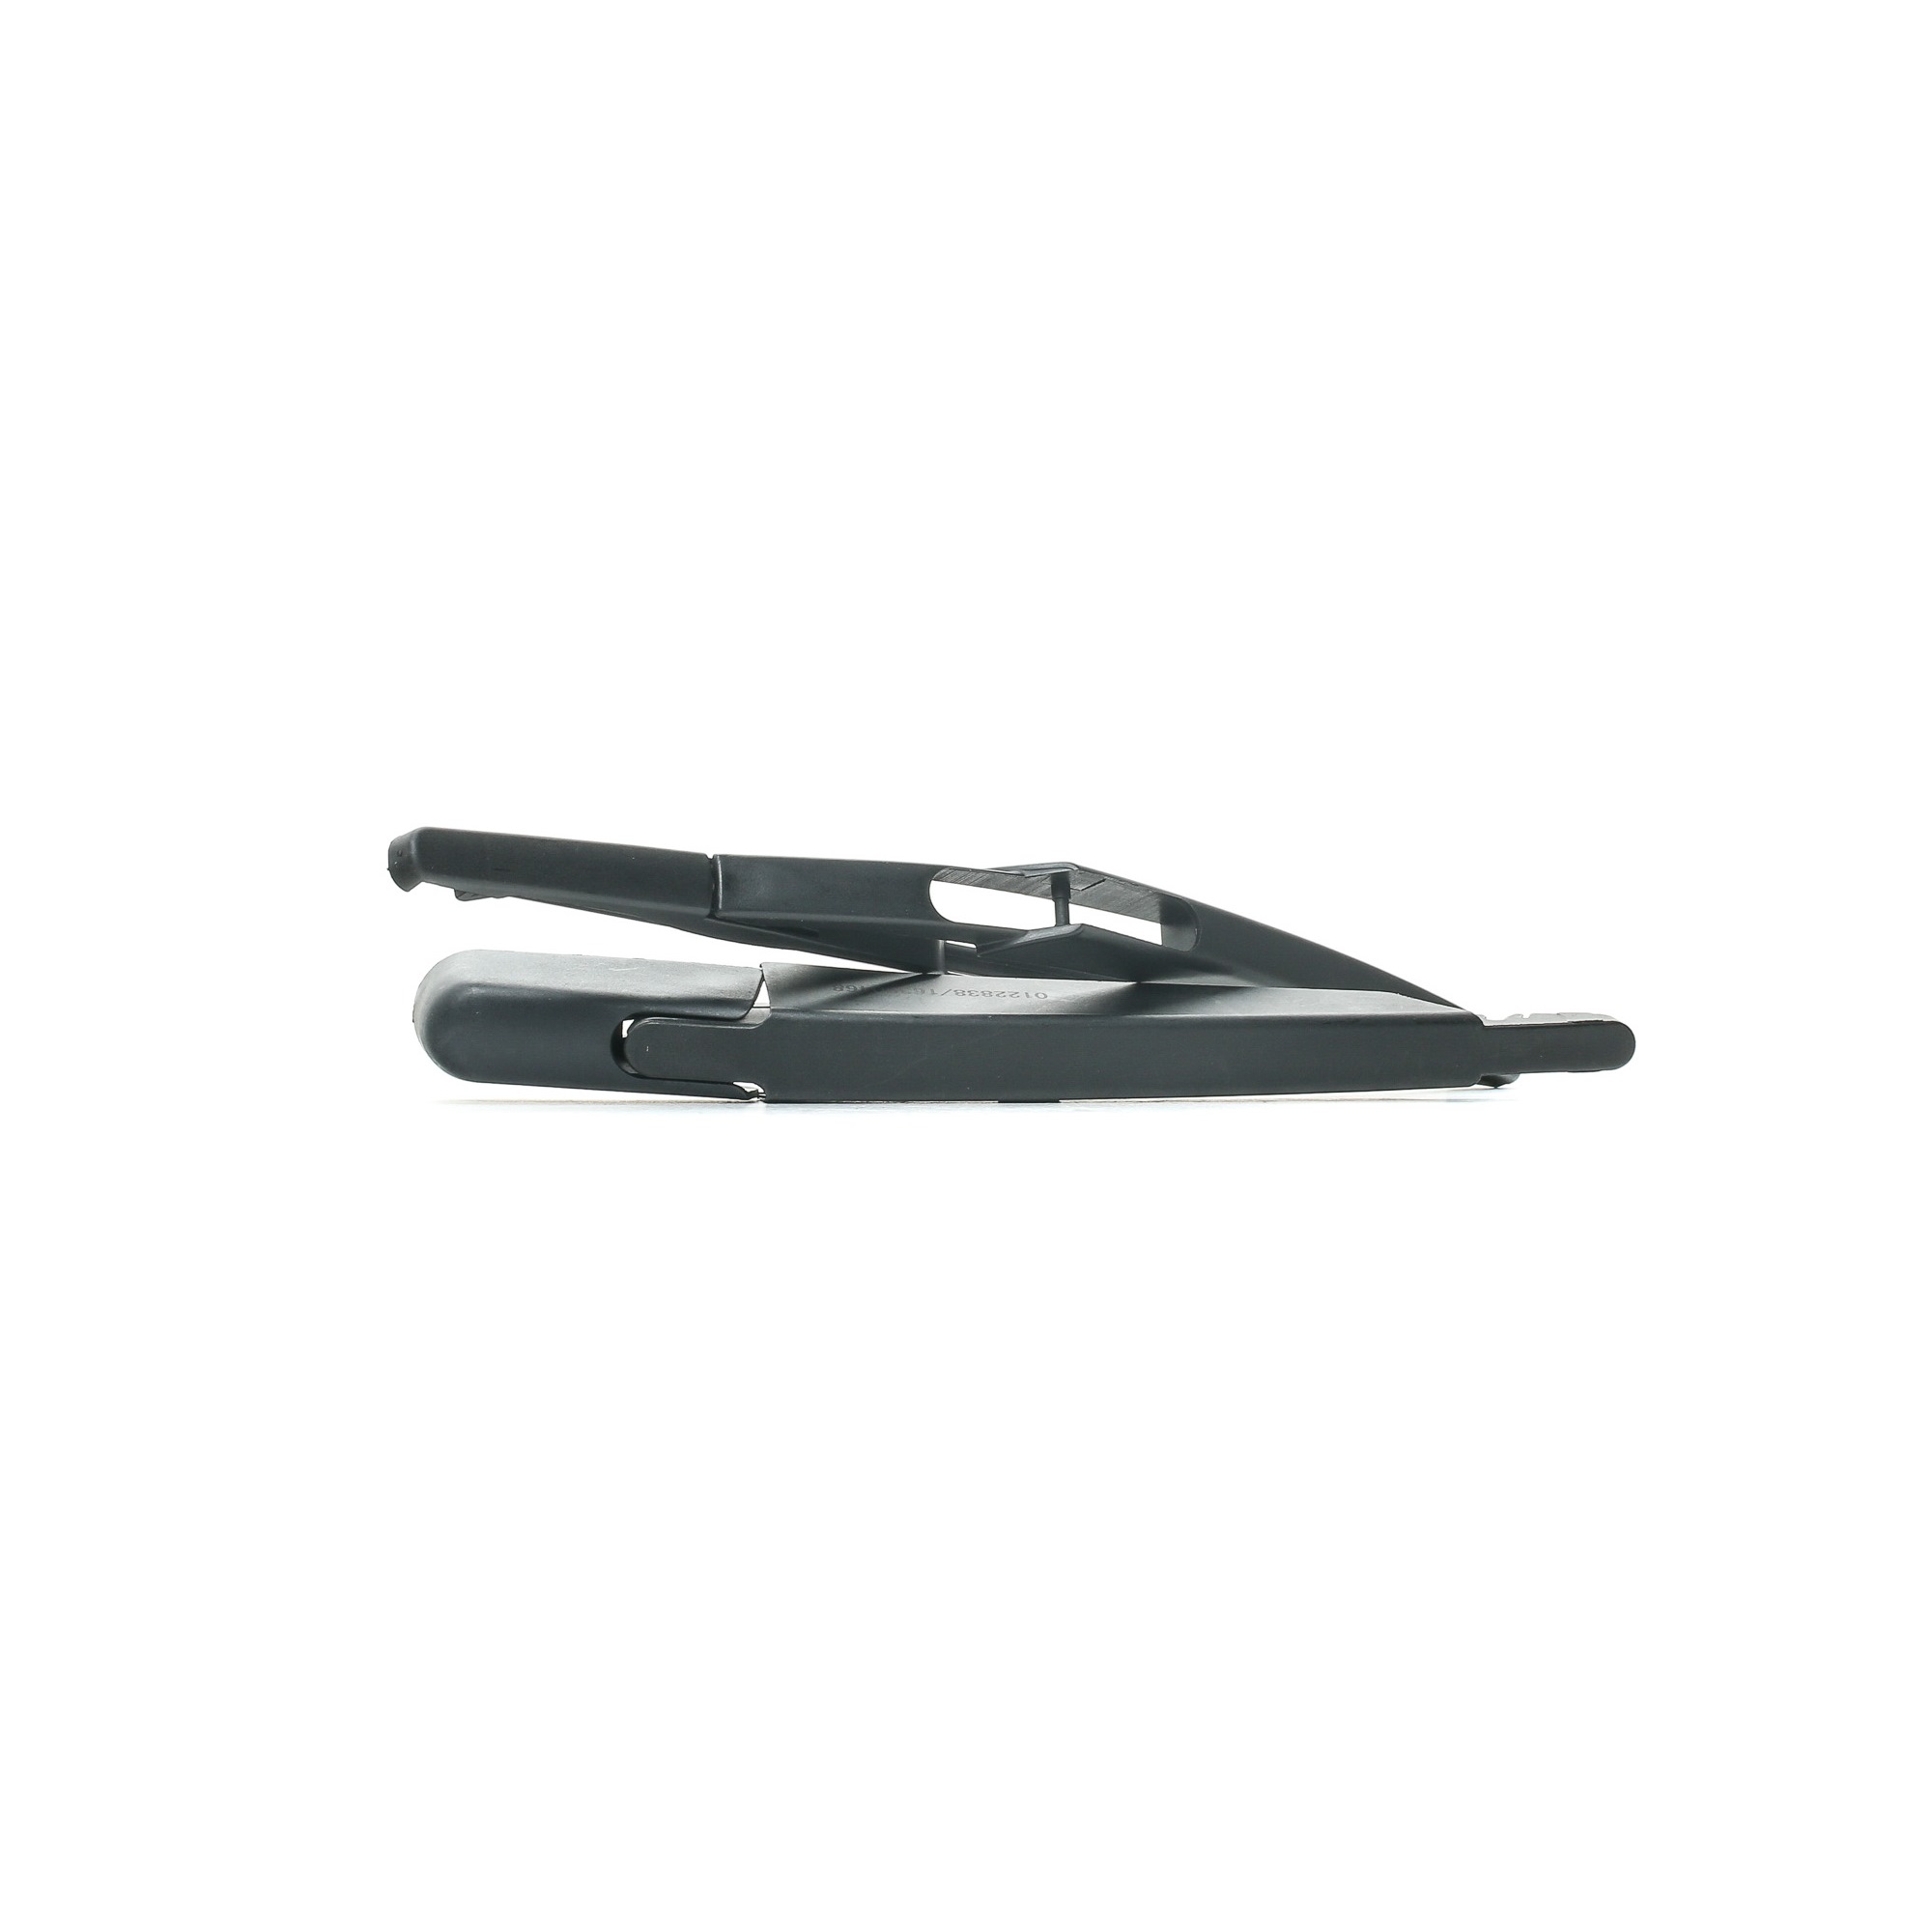 SKWA-0930179 STARK Windscreen wiper arm MERCEDES-BENZ Rear, with cap, with integrated wiper blade